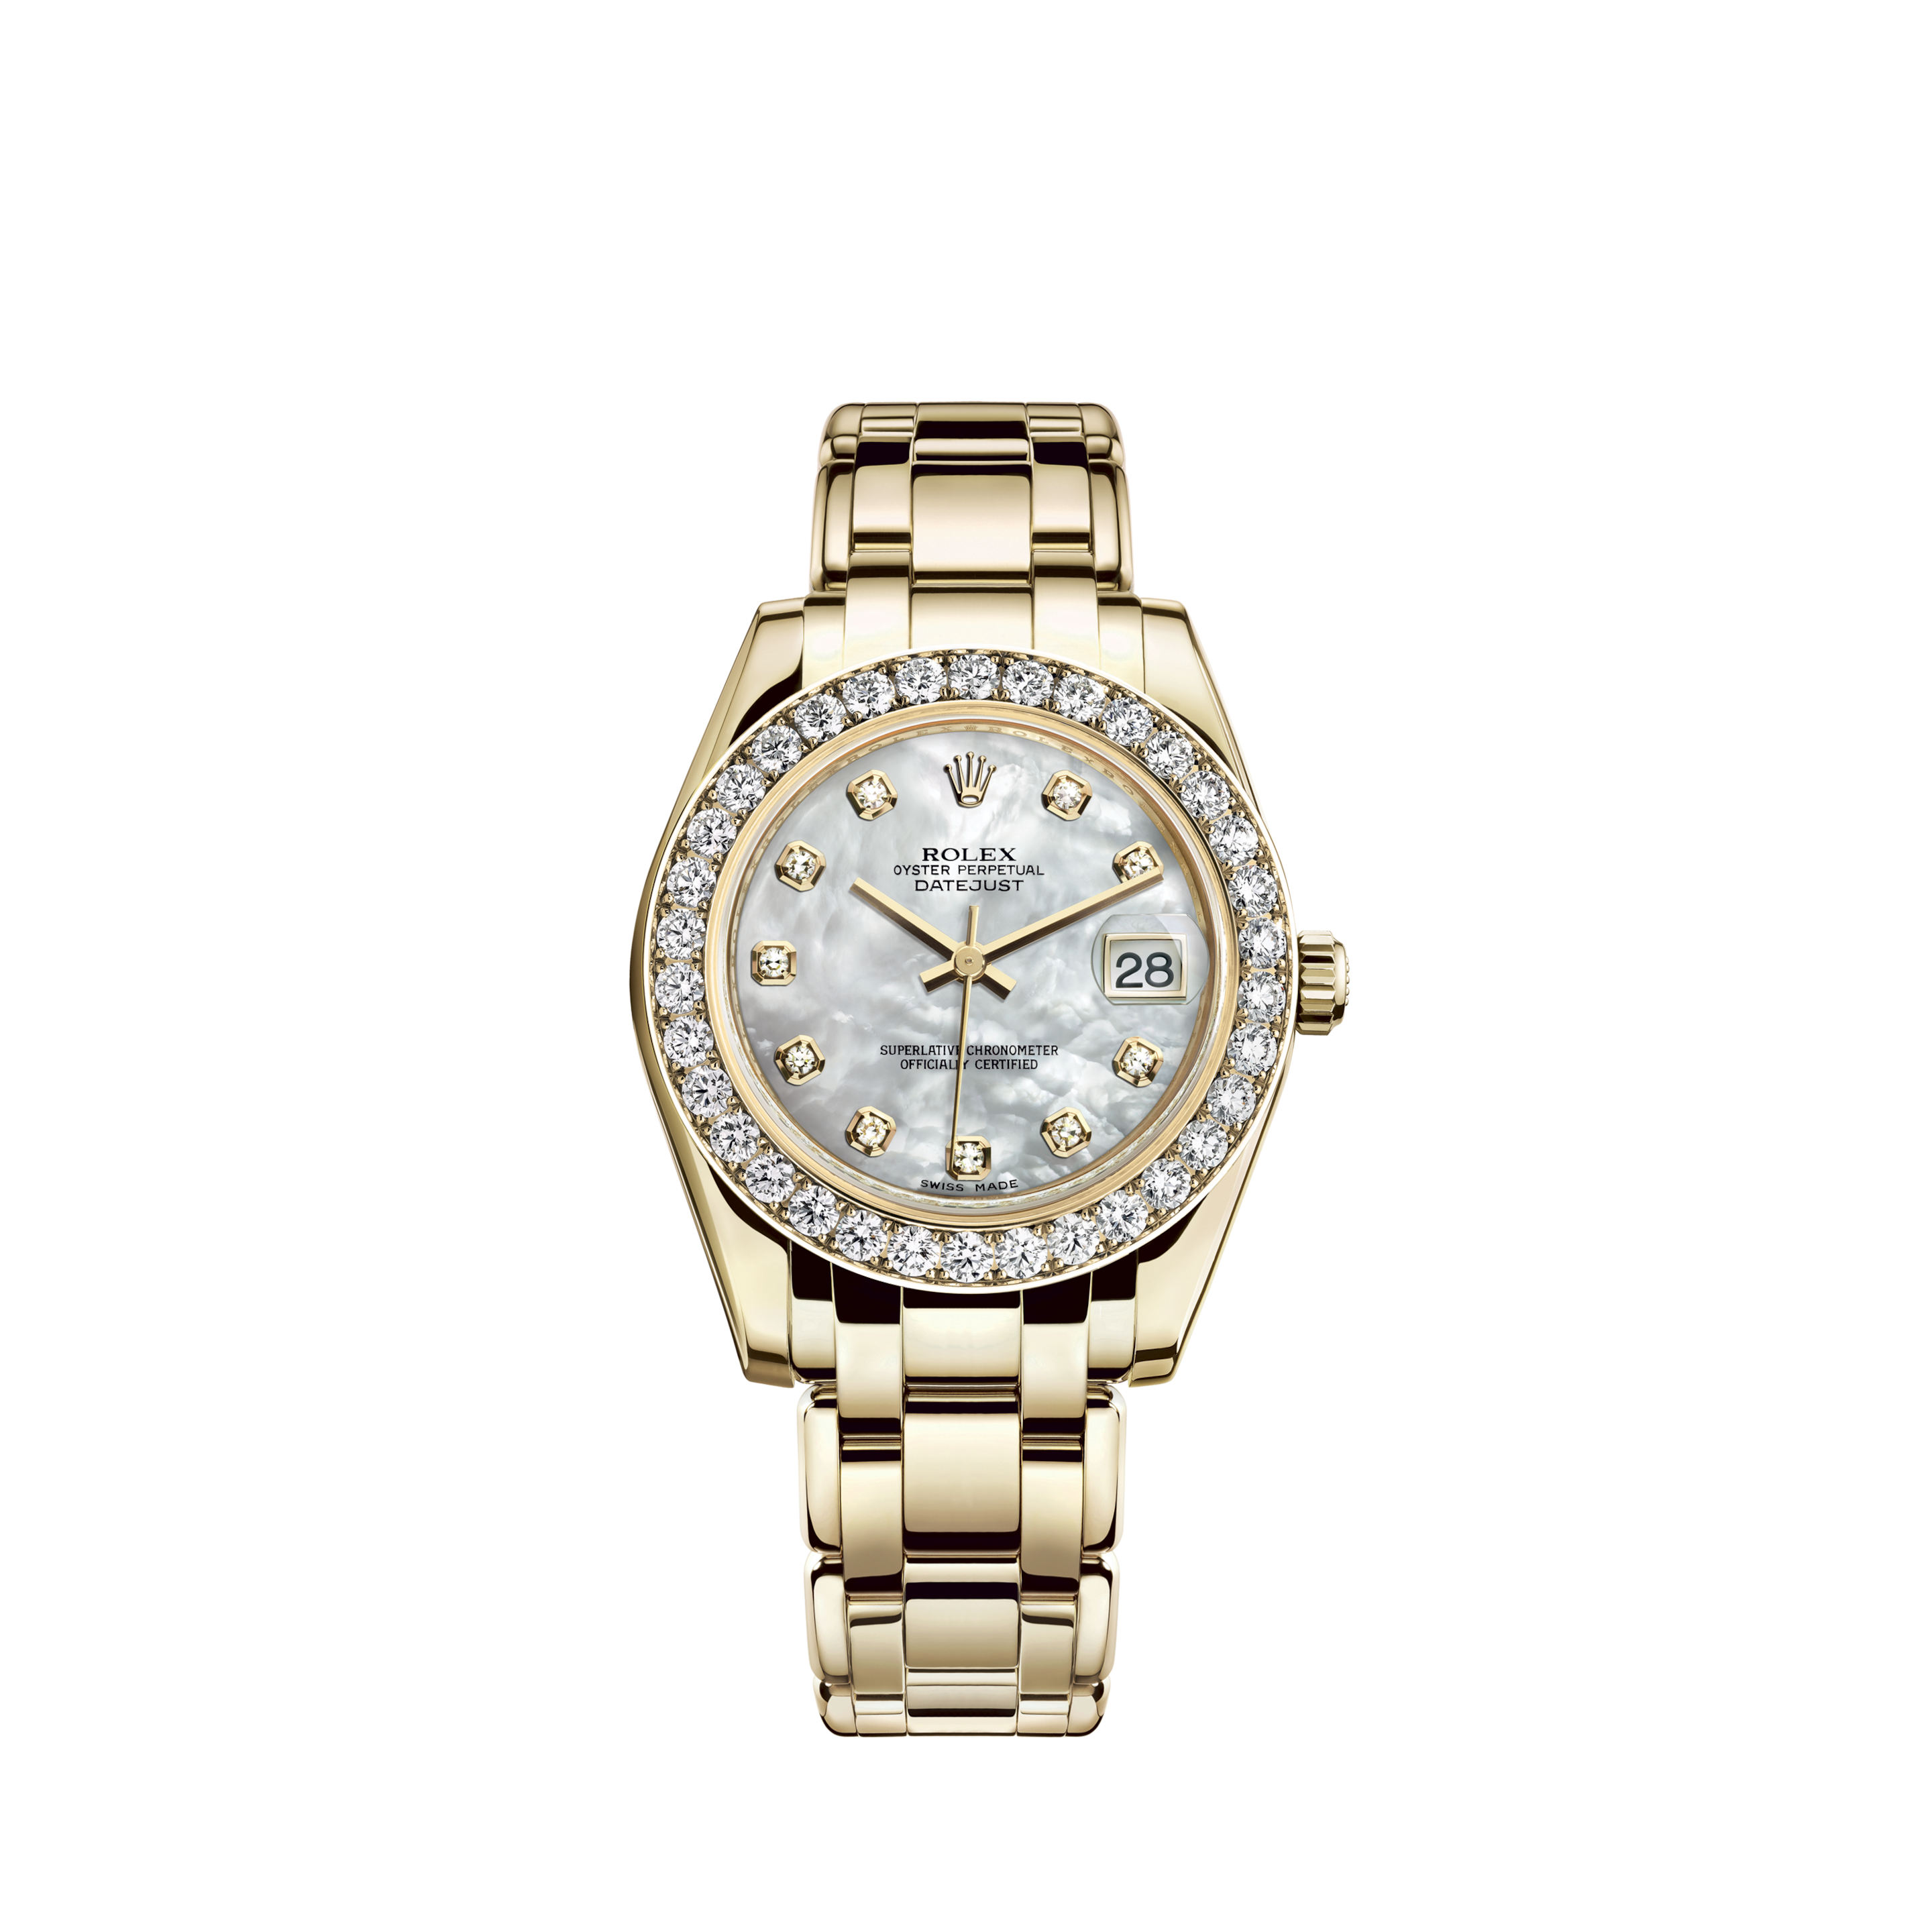 Rolex Lady Datejust - Ref: 179174 - from 2011 - FULLSET LC EURolex Lady Datejust - Ref: 69173 - aus 1986 - LC 100 - FULLSET